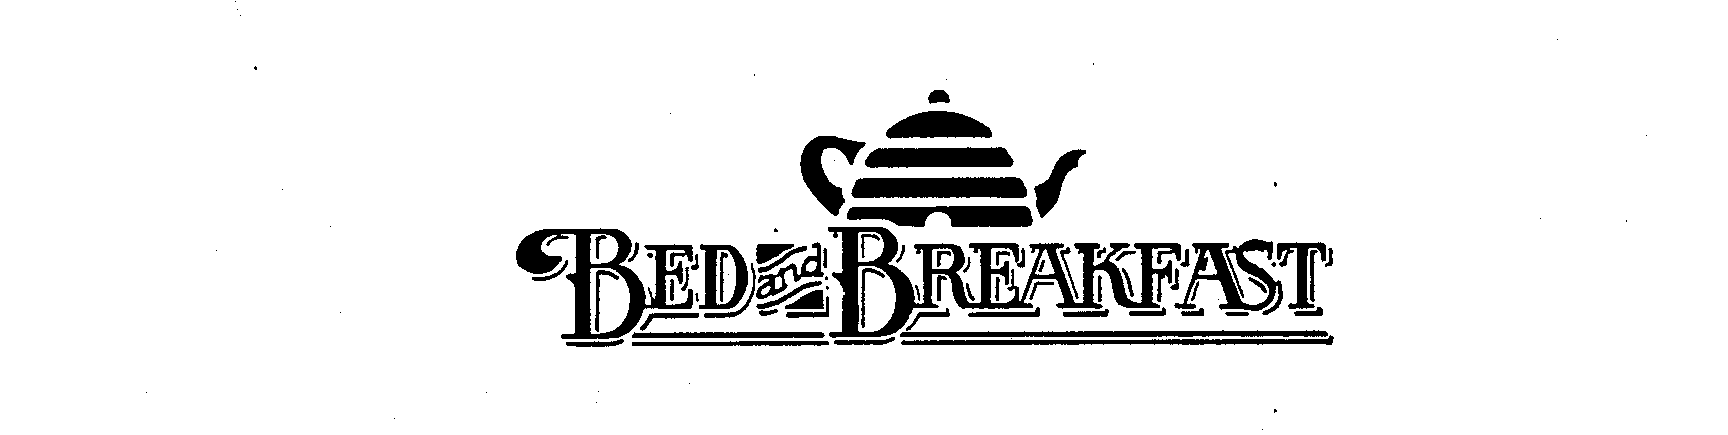  BED AND BREAKFAST